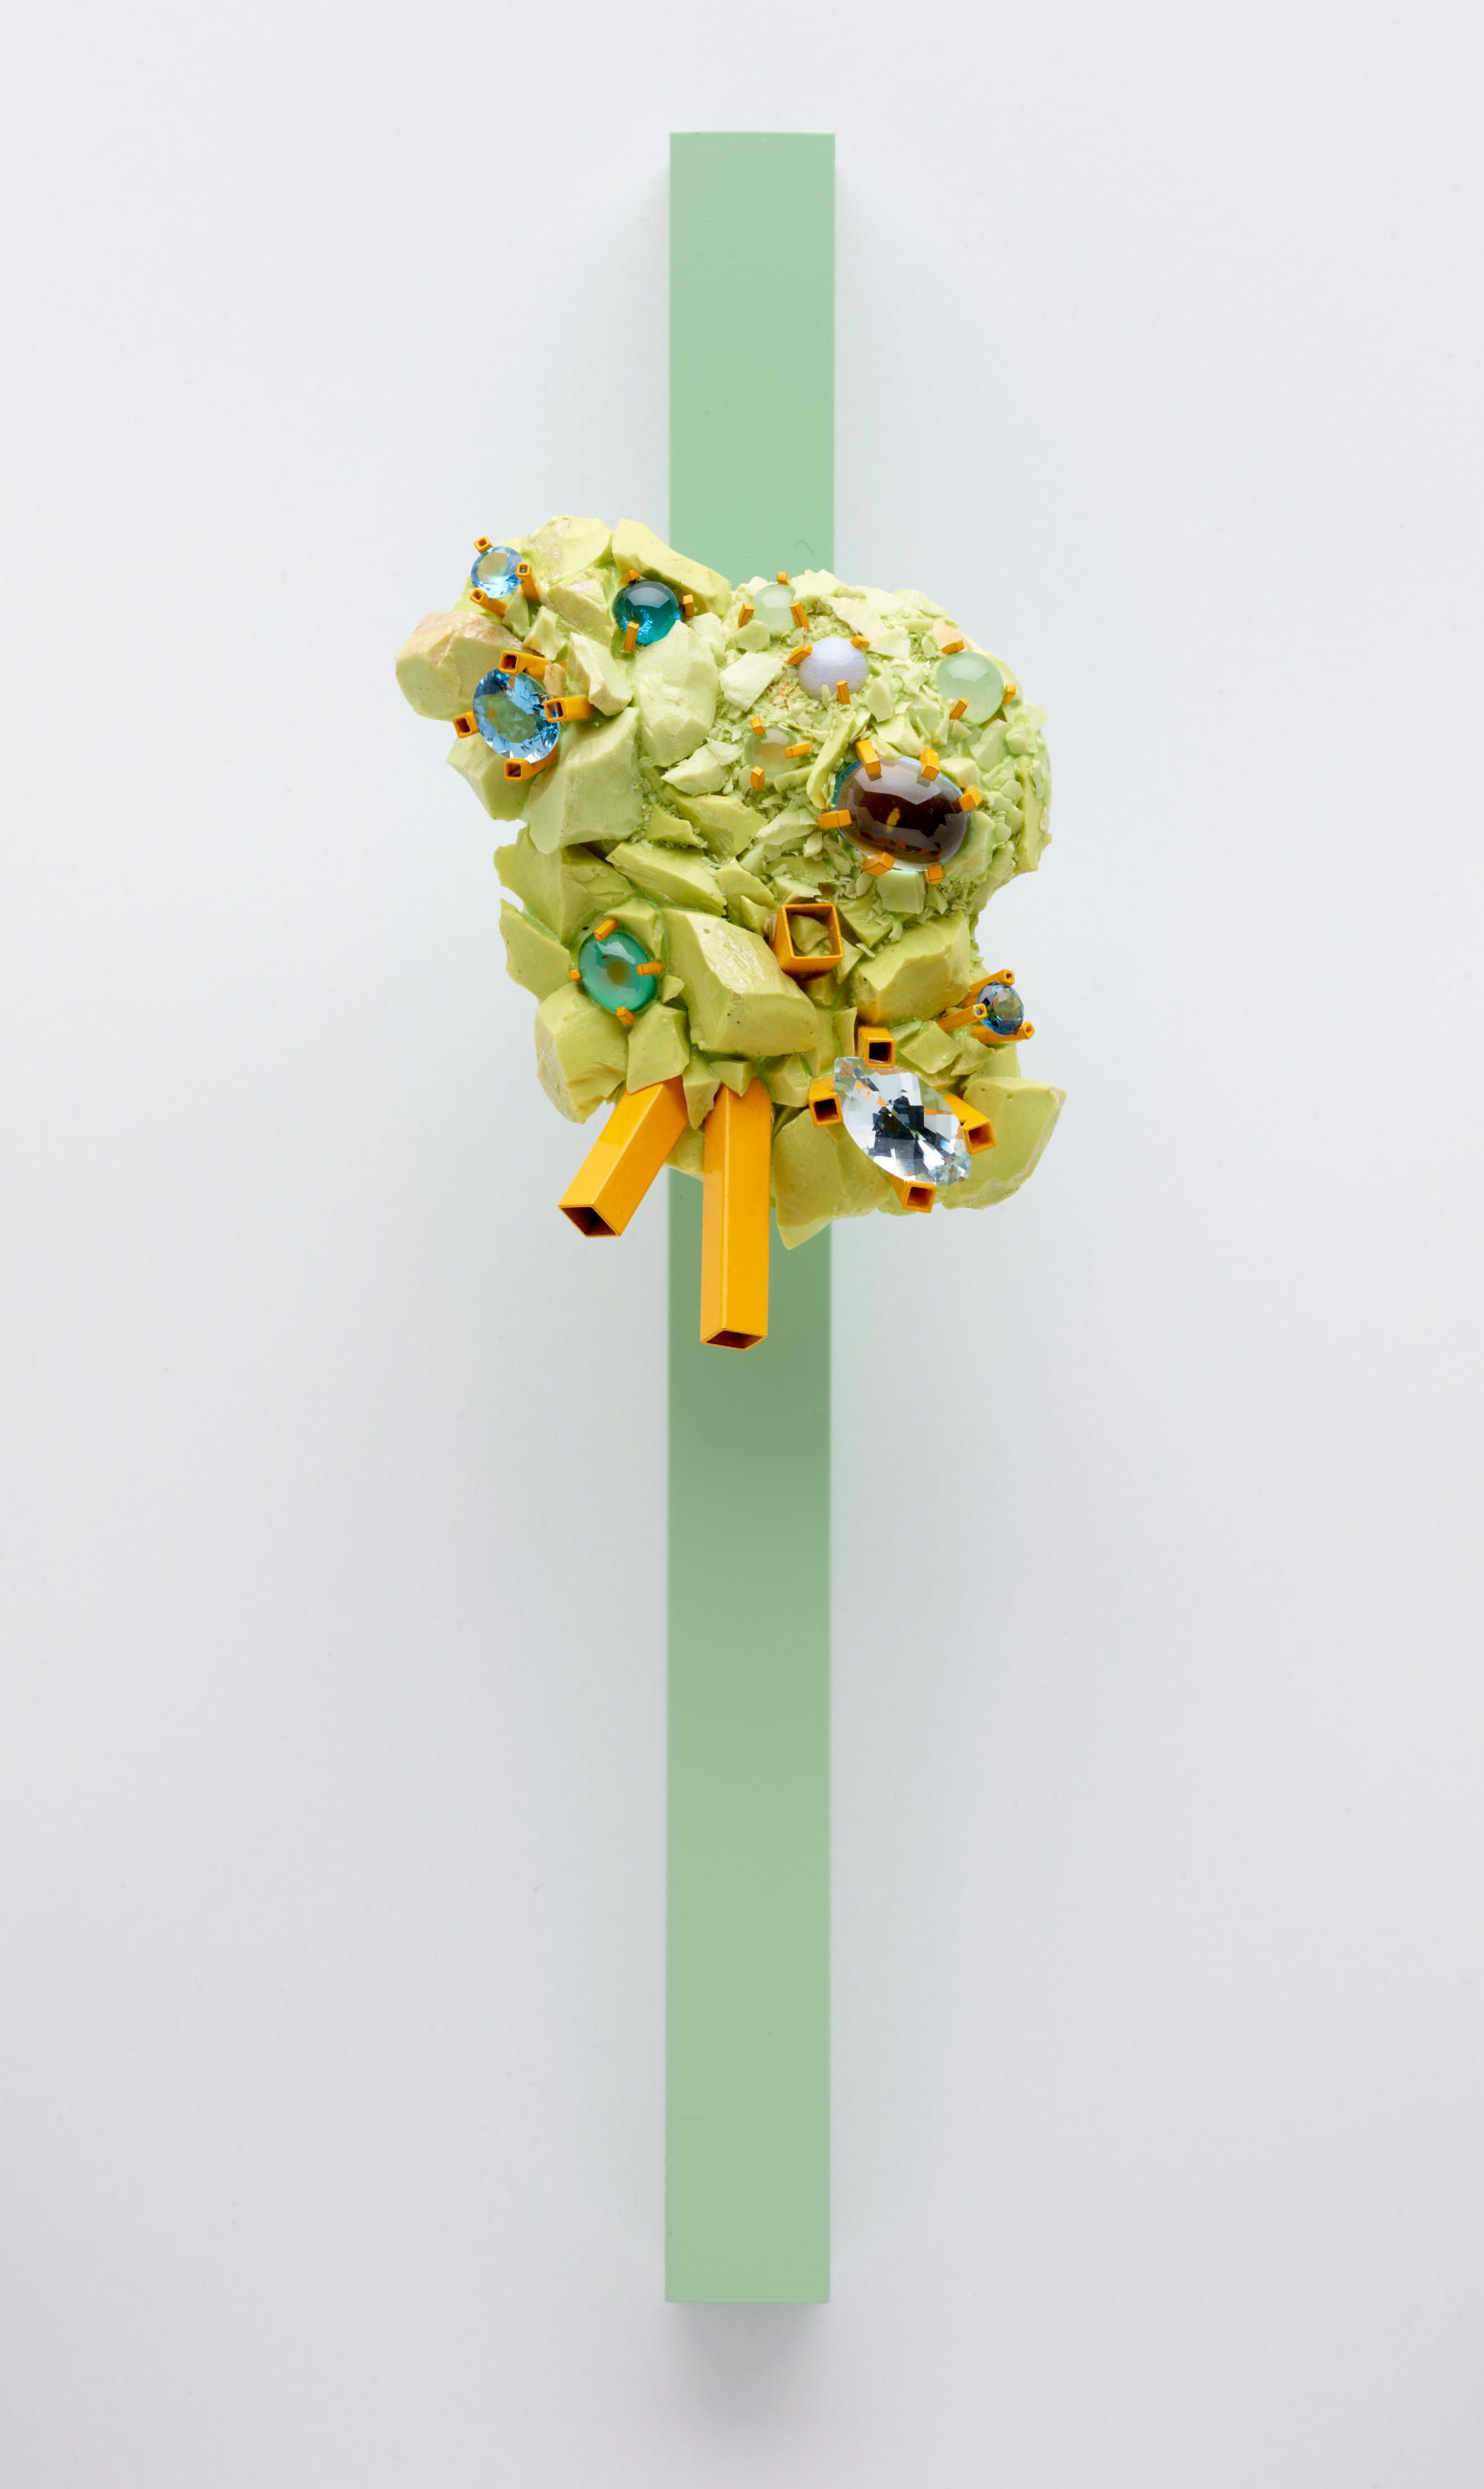 A sculptural piece of jewelry made up of a lime green cluster of shards and teal gems with vibrant orange accents, mounted on a slender, vertical, mint-green post.